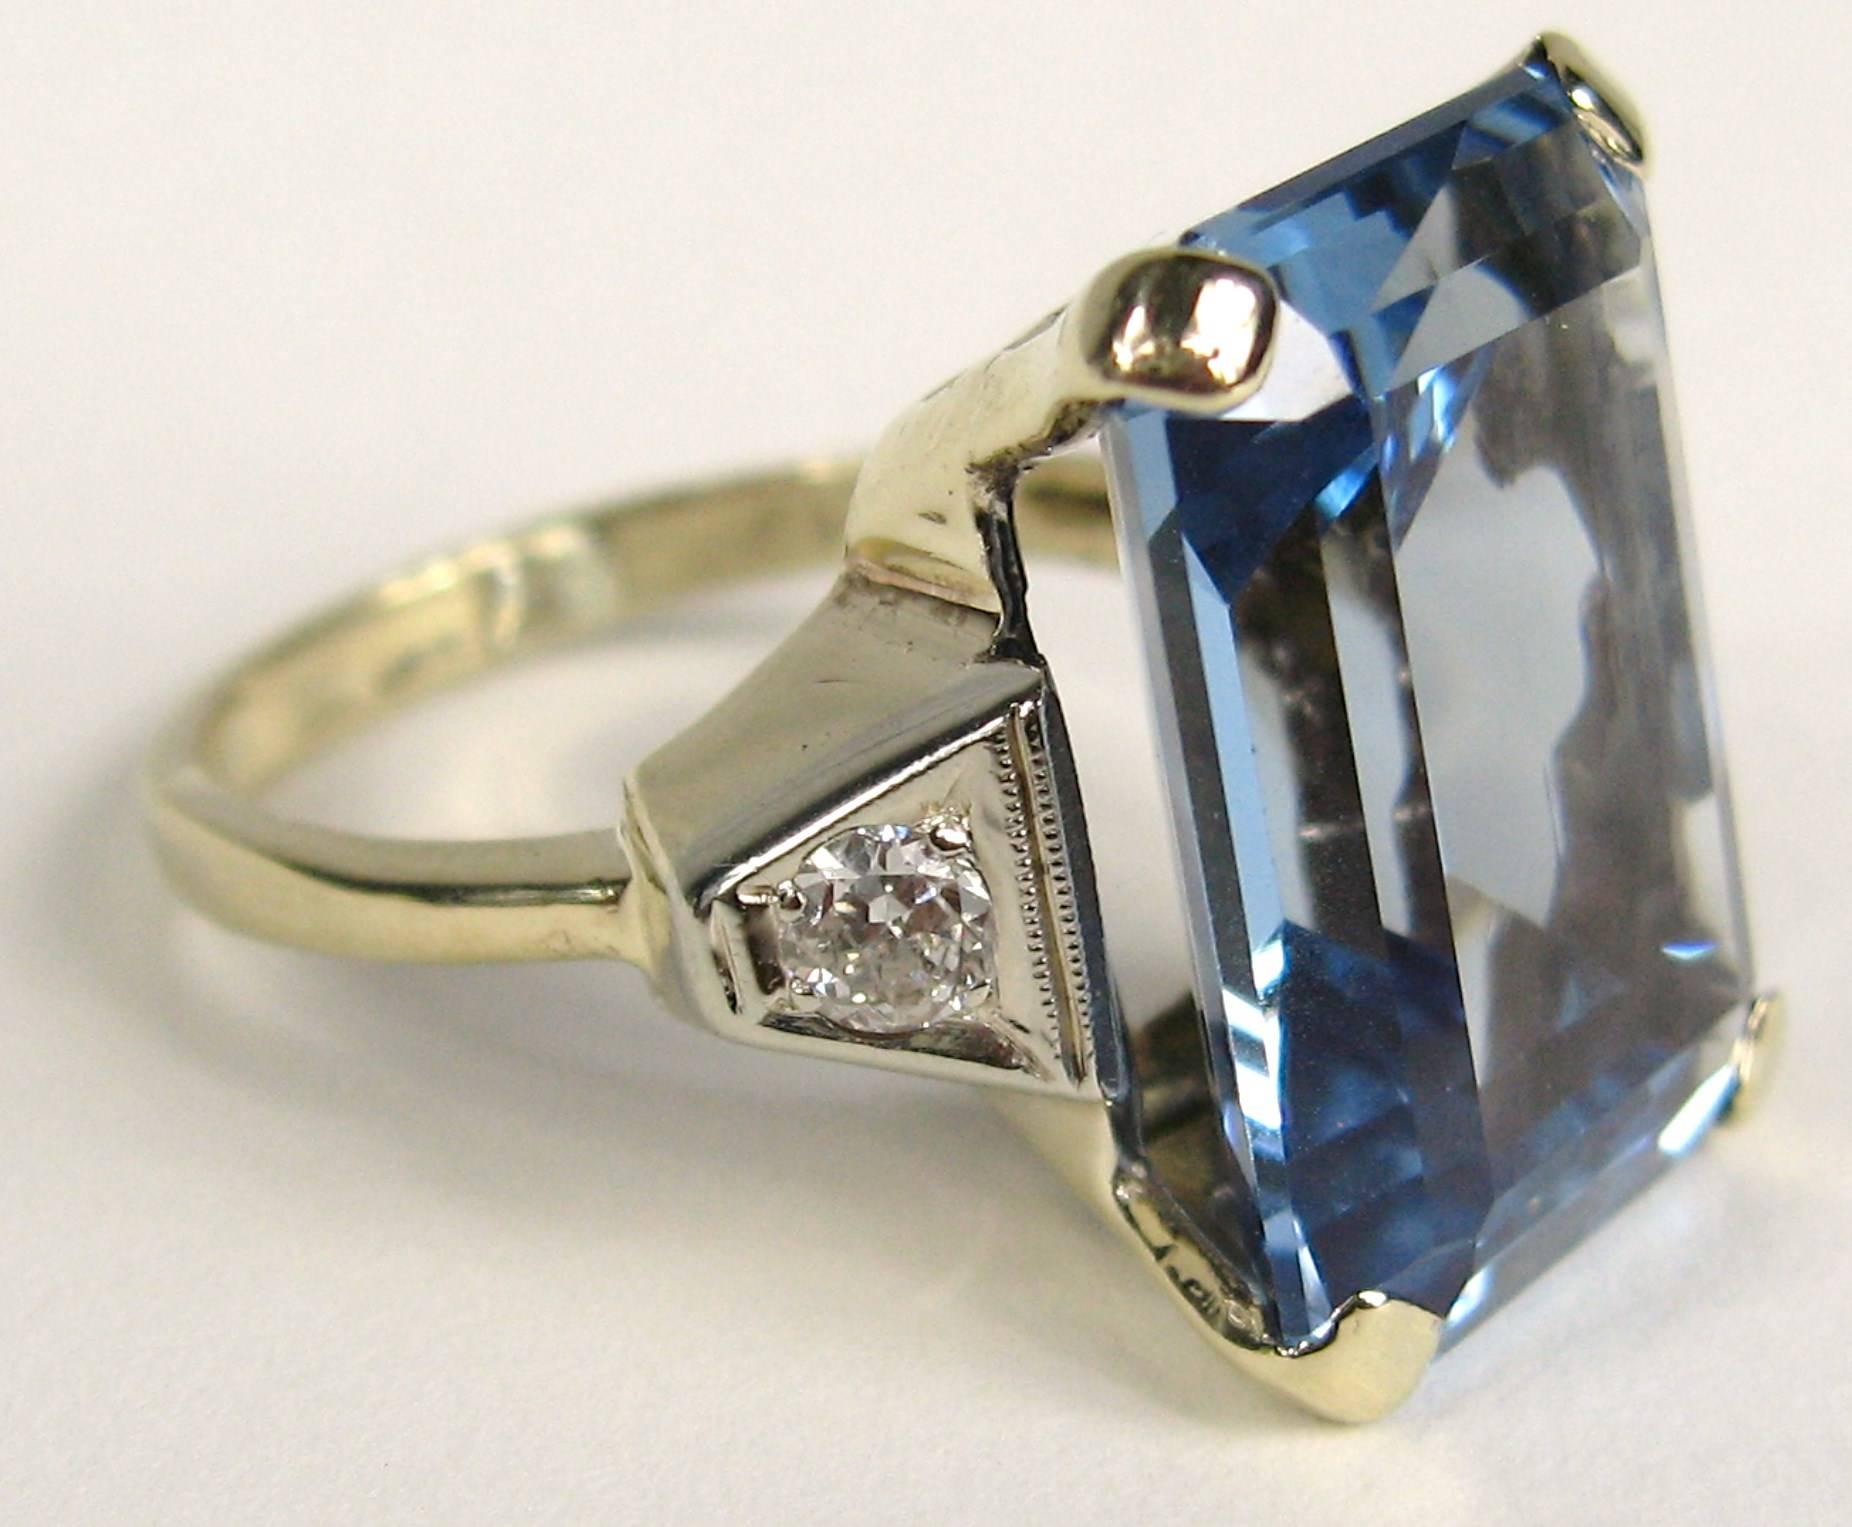 This is exquisite. Large Emerald Cut Blue Topaz Ring flanked by diamonds on either side. Set in 14K yellow and White Gold, Ring is a size 6.5 and can be sized by us or your jeweler. The Topaz is approximately 15.70  Carats and diamonds equal about